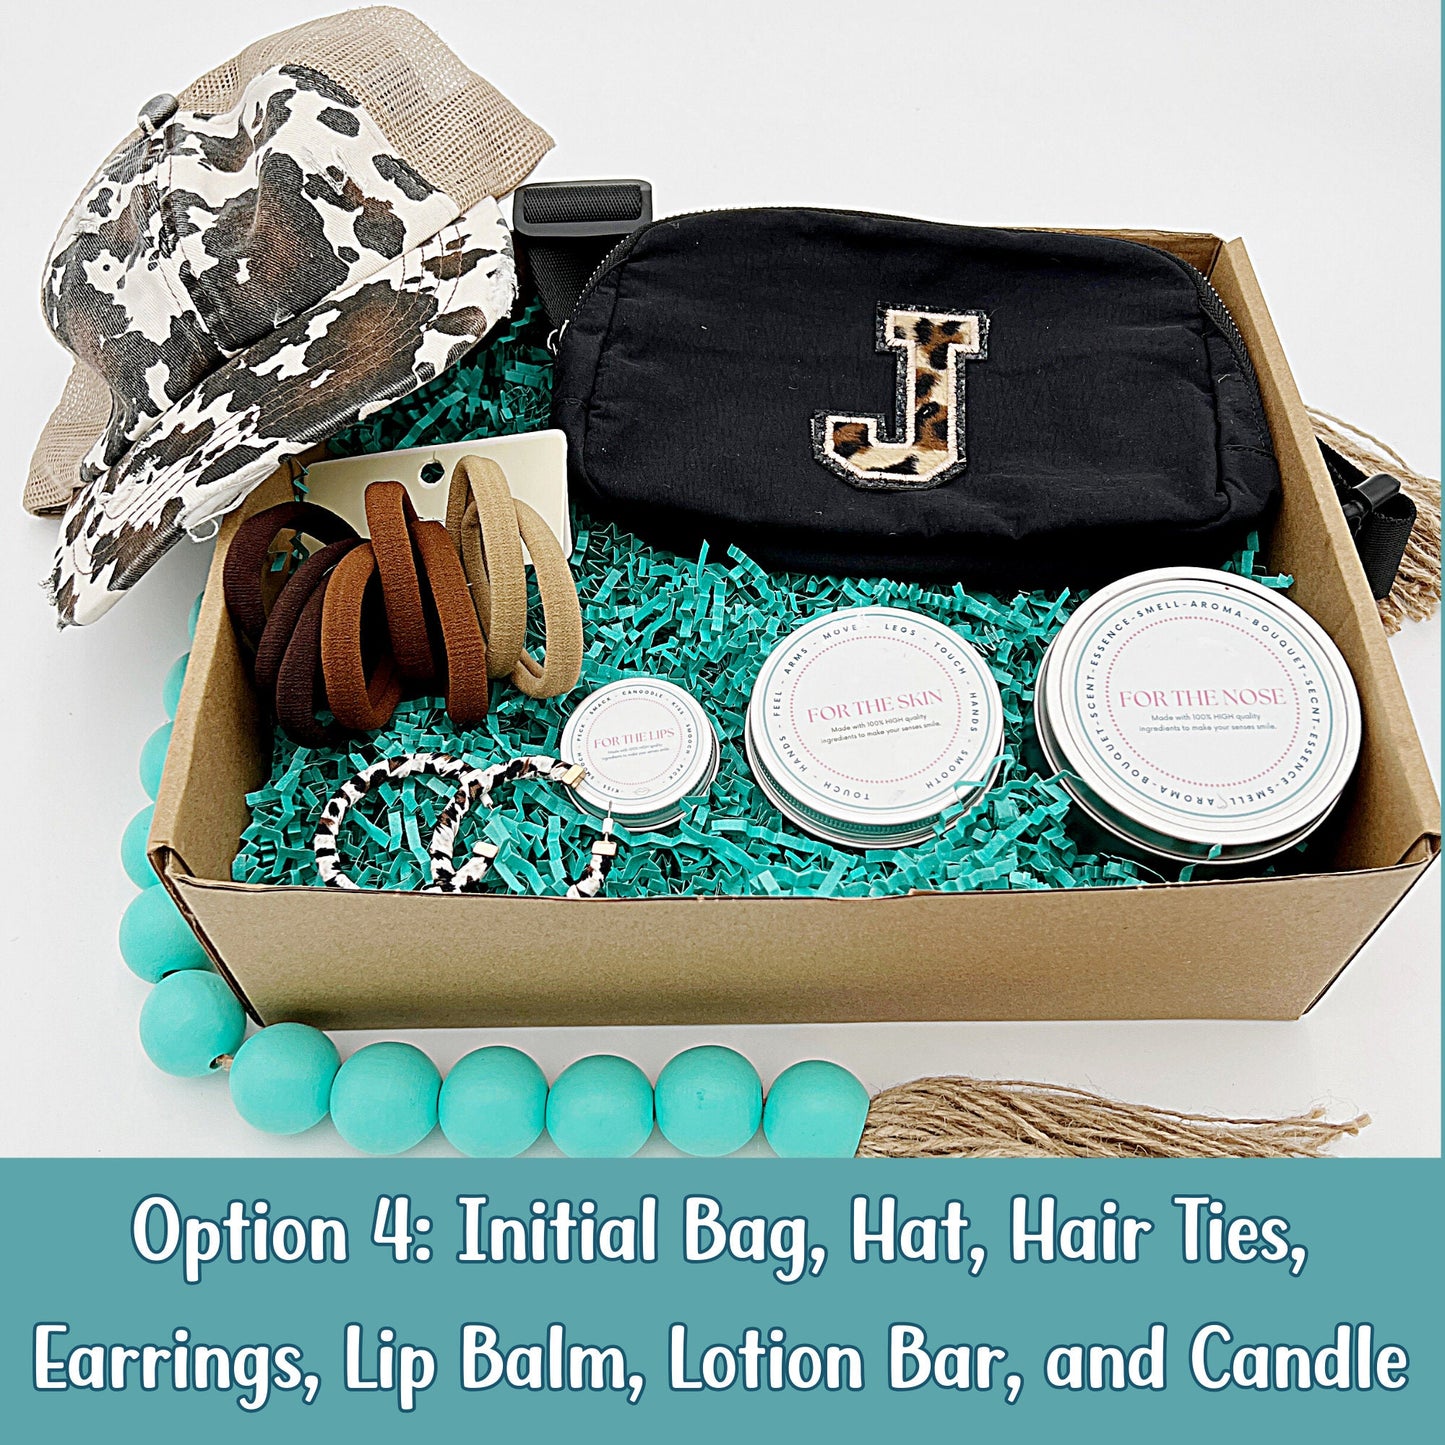 Deluxe personalized gift box with a camo print hat, custom initial waist bag, hair tie, earrings, candle, lotion, and lip balm.